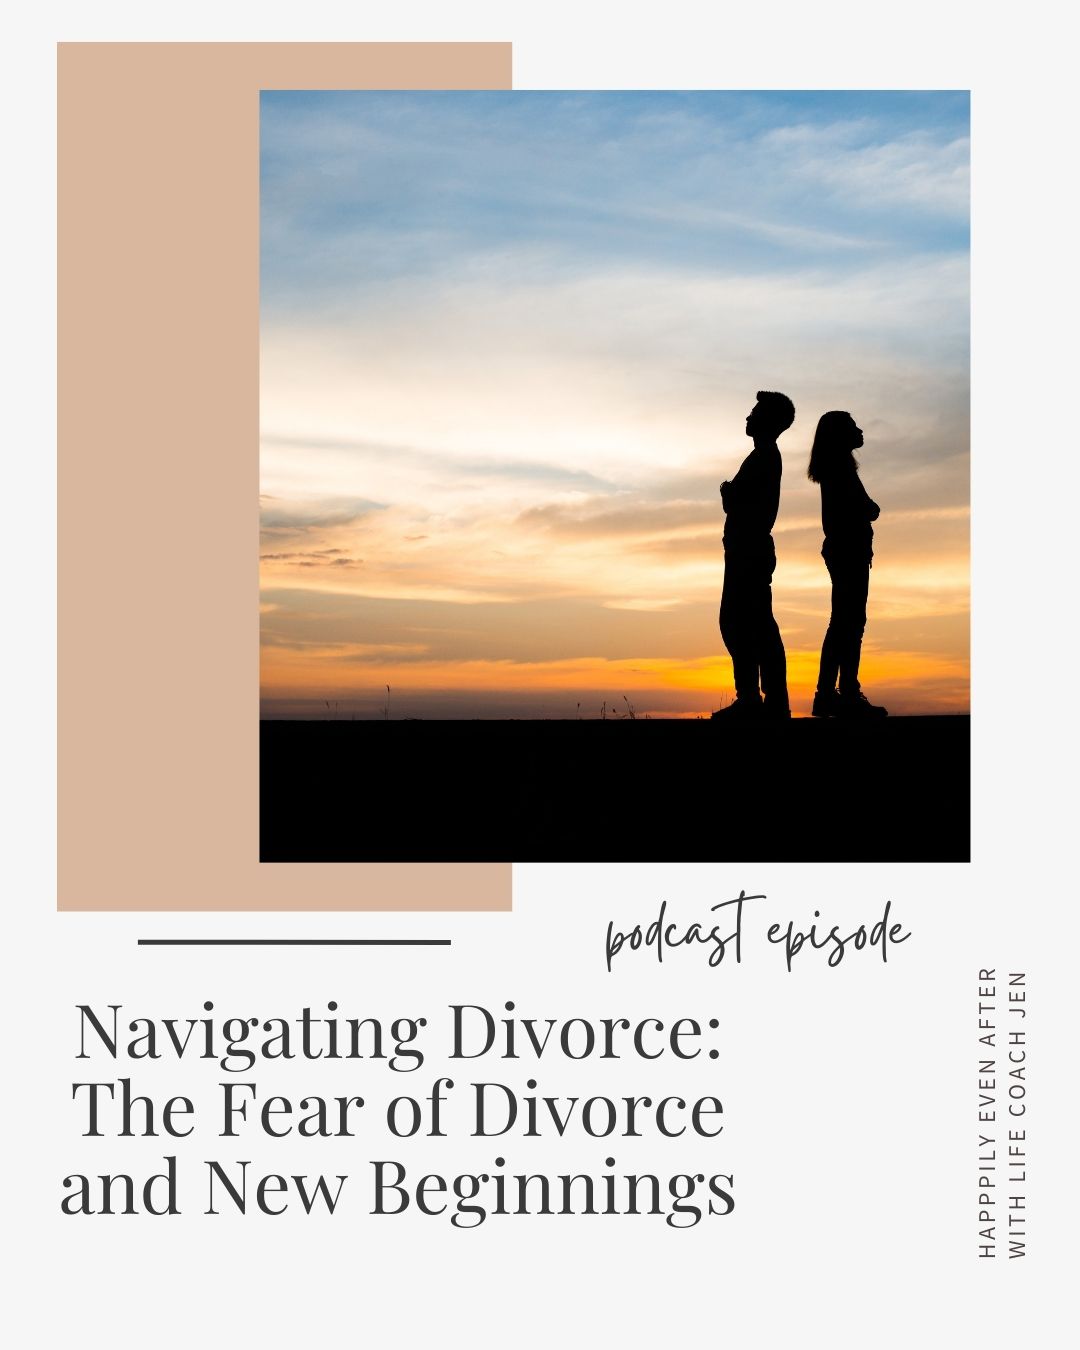 Promotional graphic for a podcast episode titled "navigating divorce: the fear of new beginnings" featuring the silhouette of a couple against a sunset background.